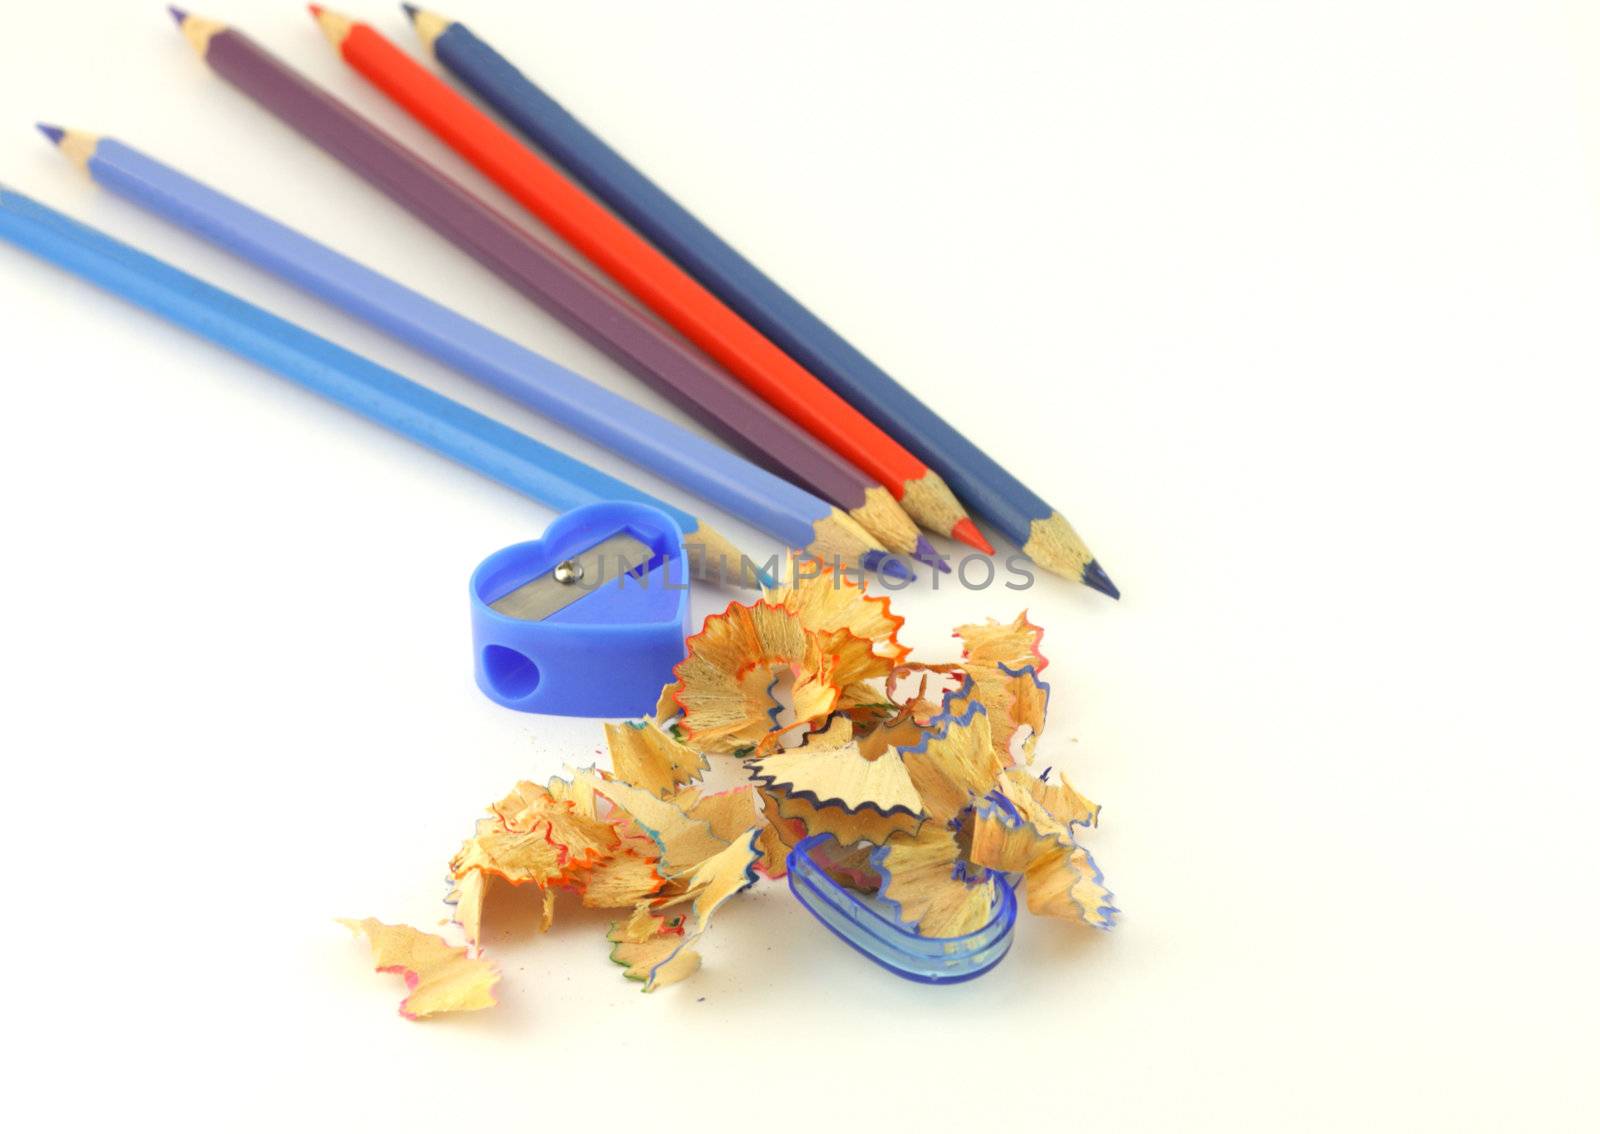 Tool for sharpening a pencils with shavings. by sergpet